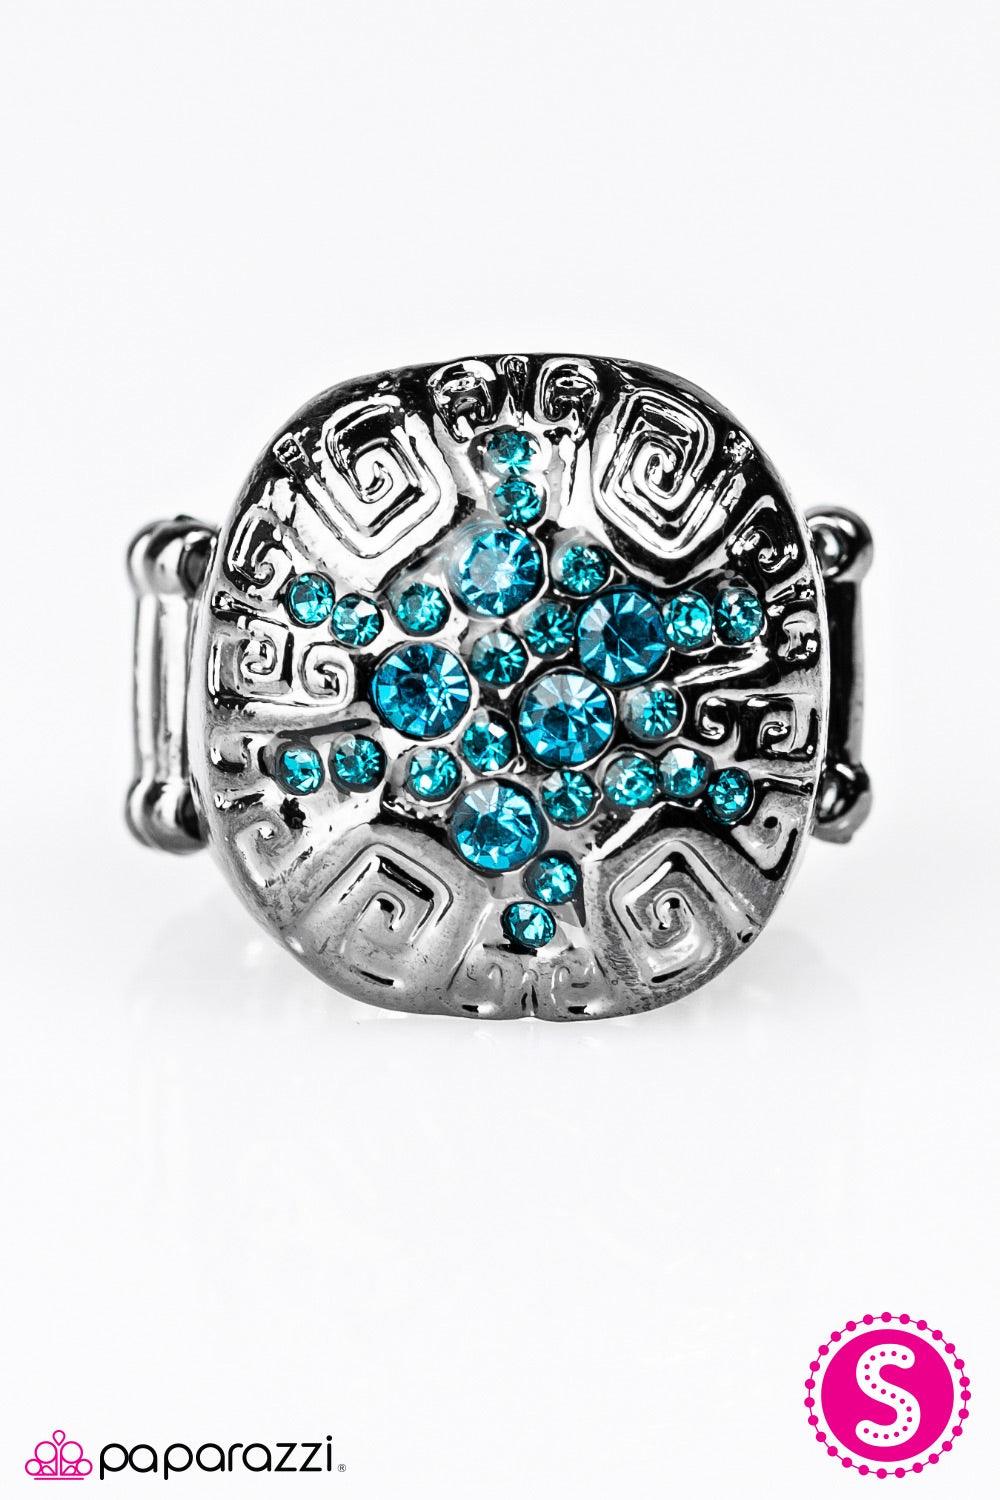 Paparazzi Accessories Have A Blast - Blue A glistening gunmetal frame is etched in indigenous inspired patterns. An explosion of glittery blue rhinestones radiate from the center for a blast of color. Jewelry